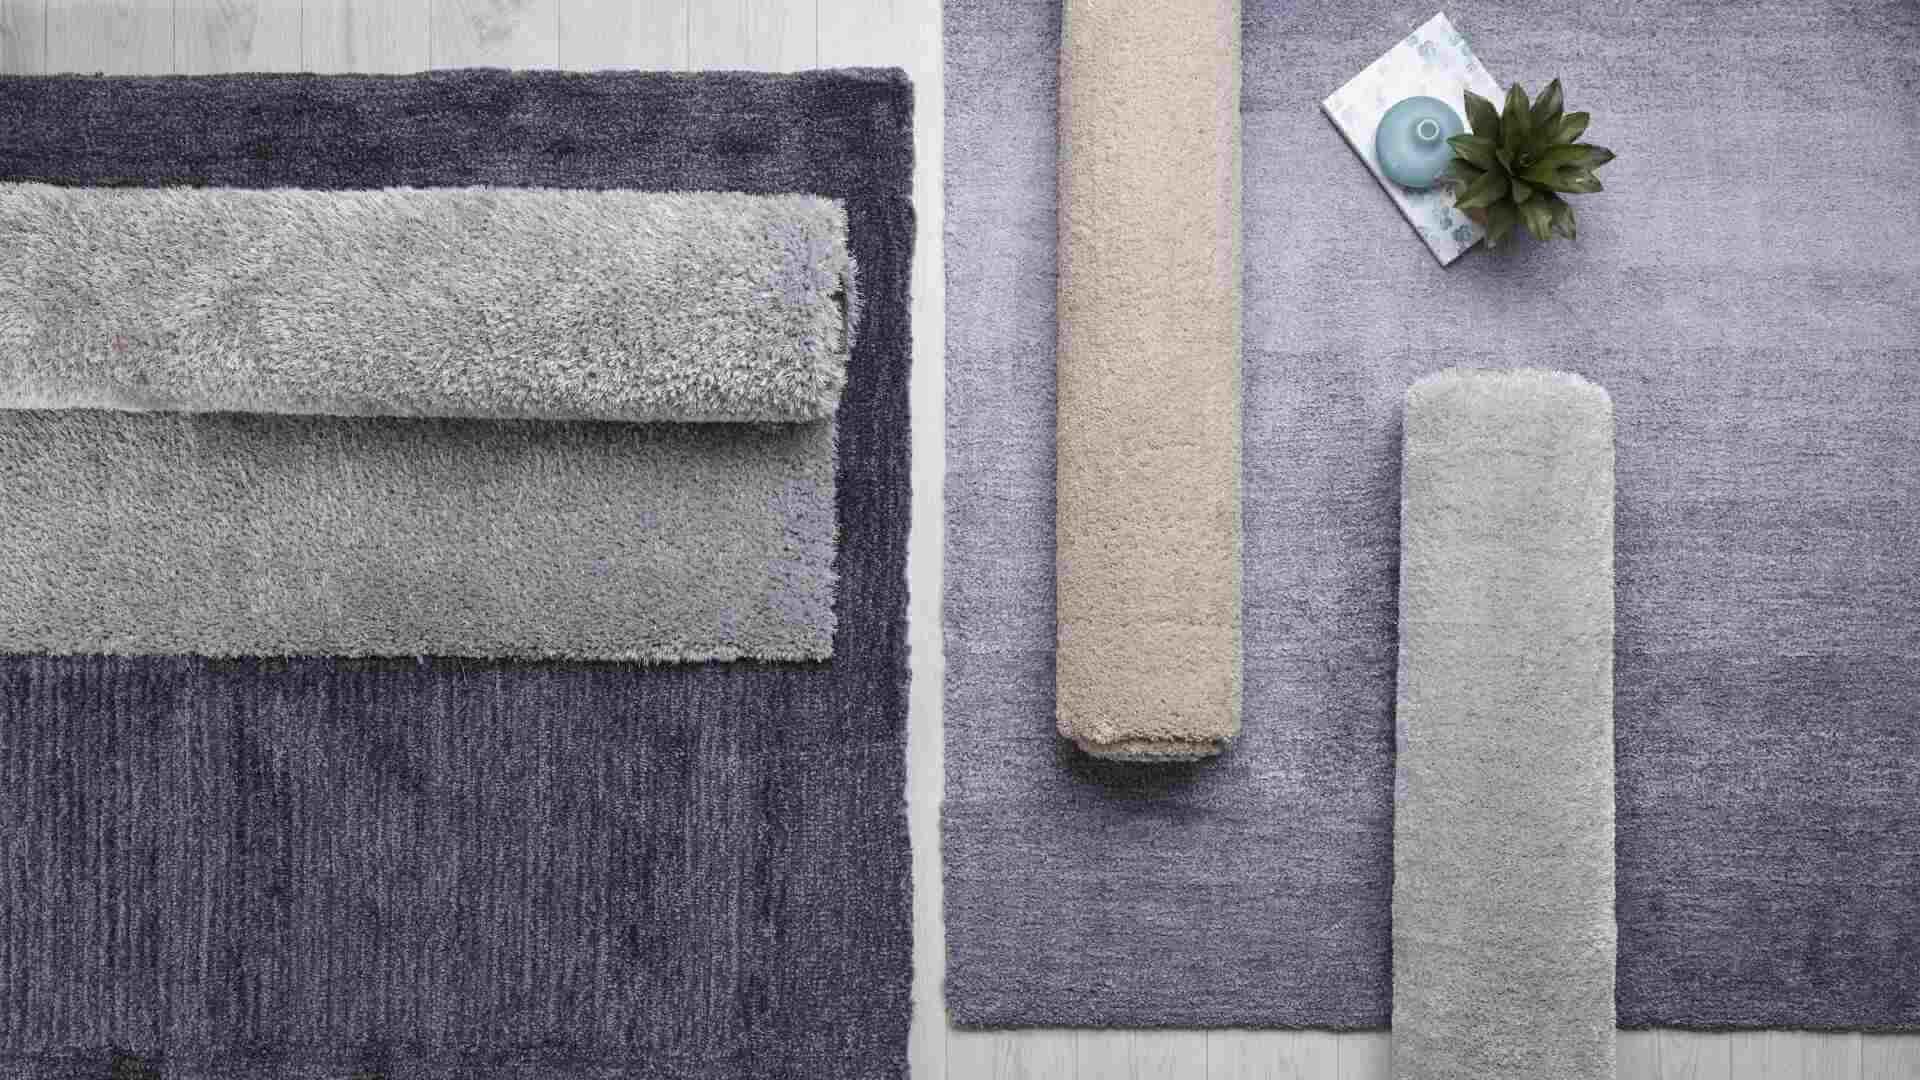 How To Care For Rugs & Mats